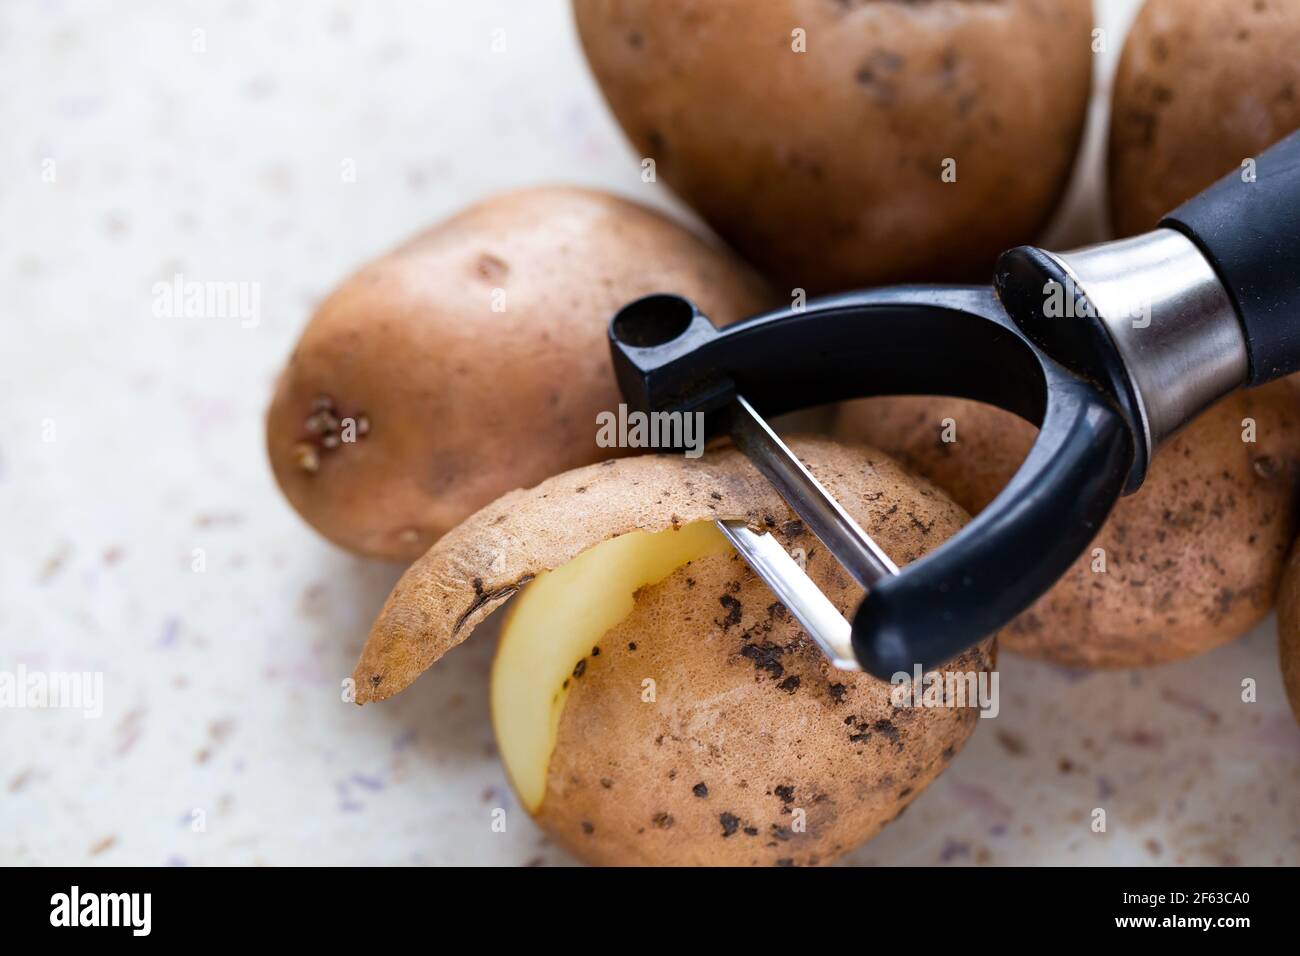 https://c8.alamy.com/comp/2F63CA0/several-organic-potatoes-and-a-potato-peeler-on-the-table-made-in-natural-light-soft-shadows-2F63CA0.jpg